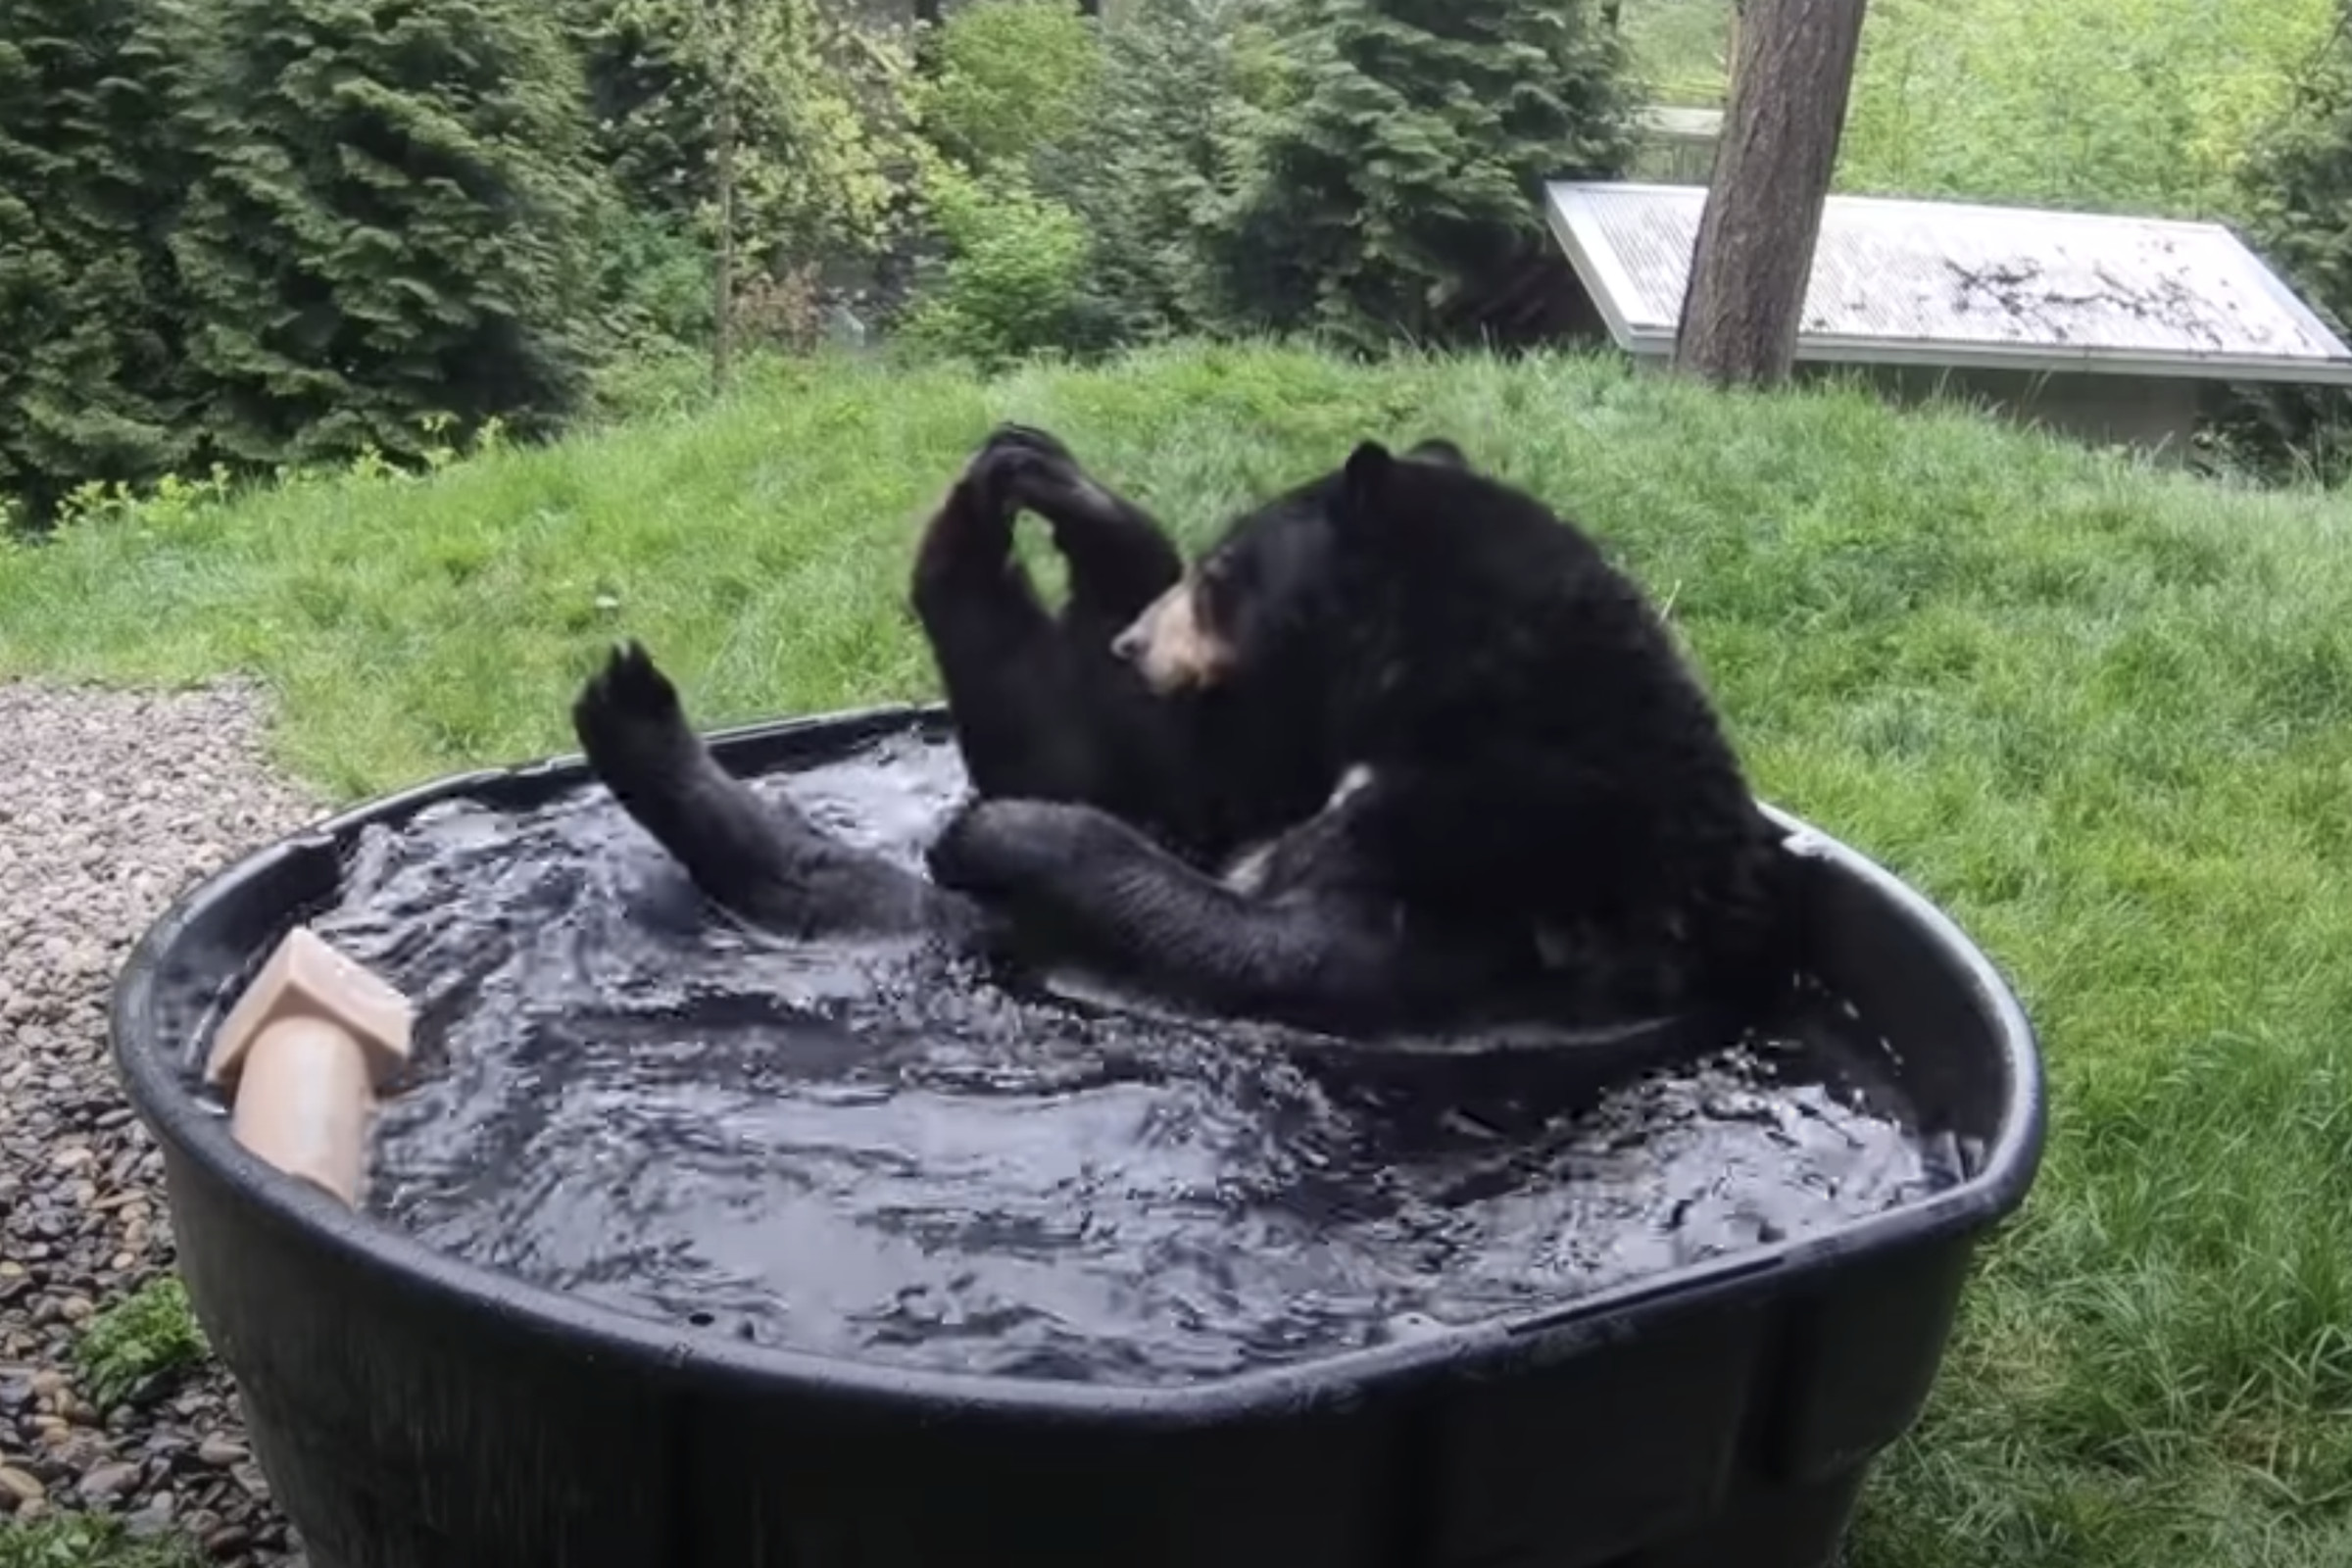 The Oregon Zoo shared a video of one of its bears taking a dip in a tub.